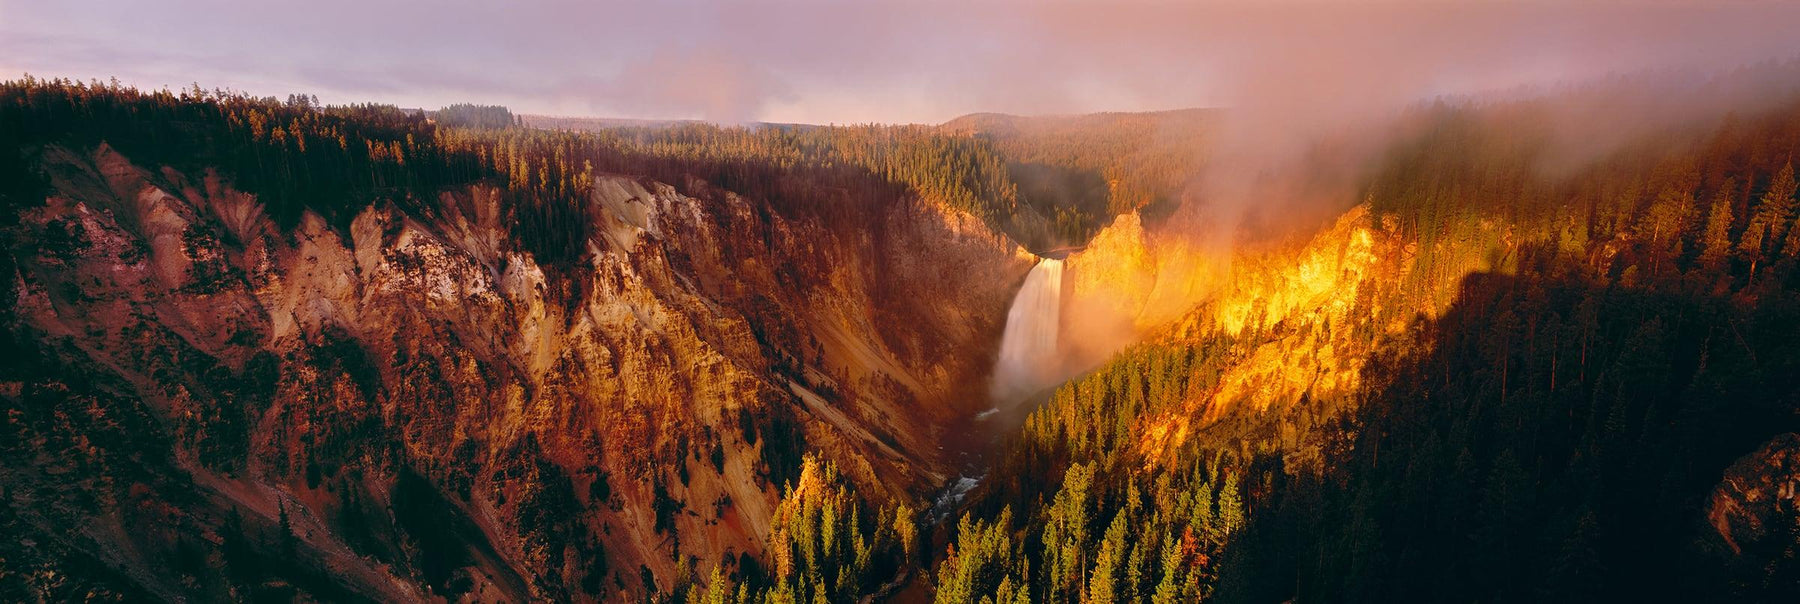 Sunlight hitting the mist covered waterfall and mountainside of Artist Point Yellowstone National Park Wyoming